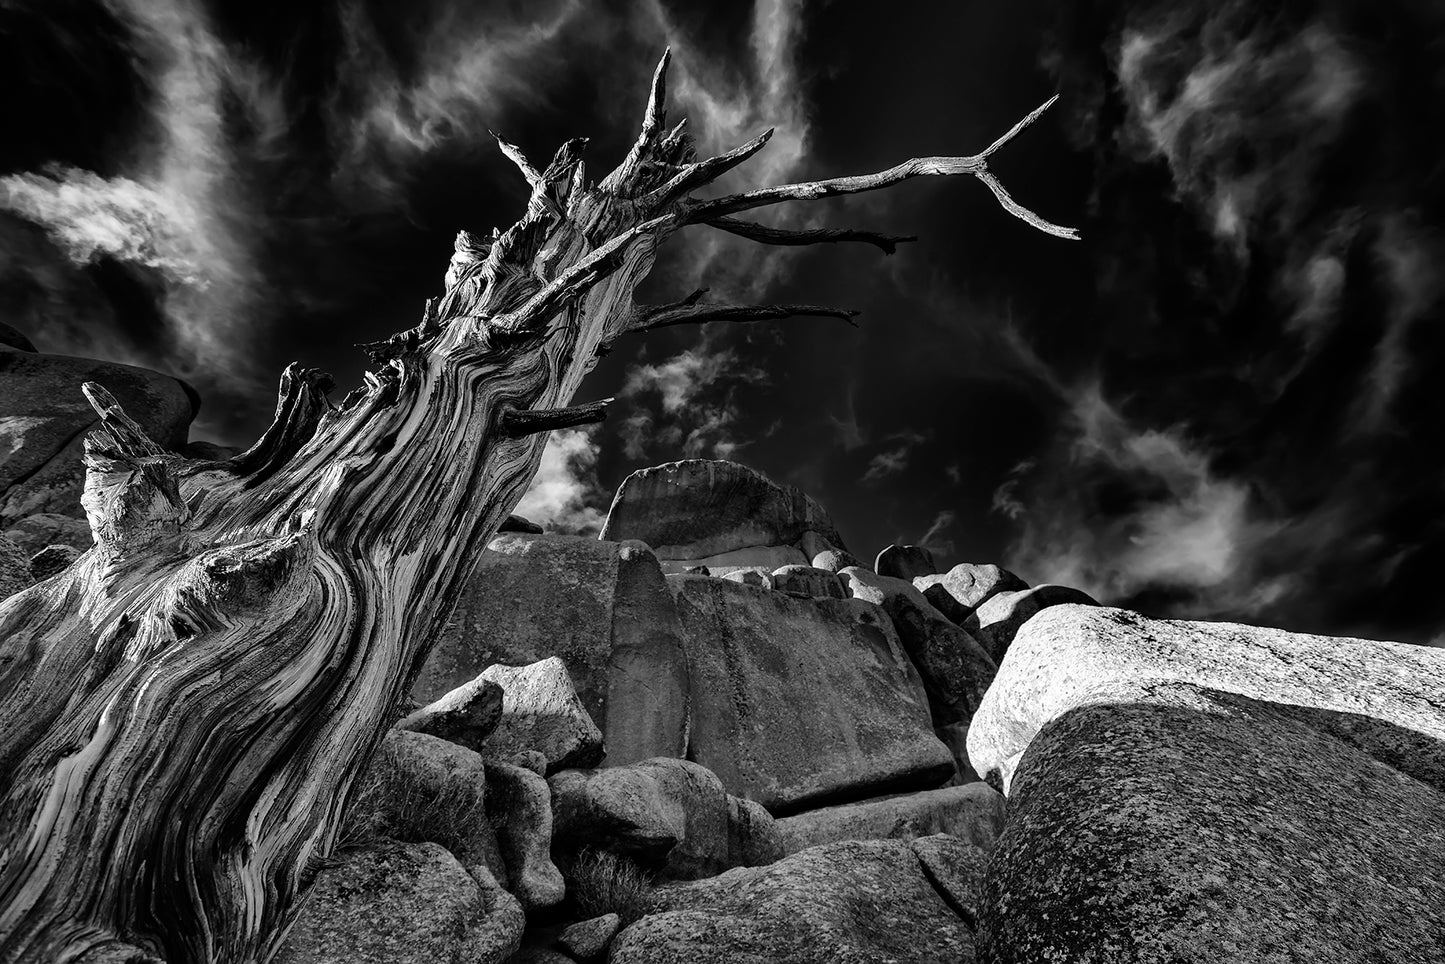 Black and white photo of an old Conifer Tree snag in the rocks of Vedauwoo  Vedauwoo State Park in Wyoming between Laramie and Cheyenne  11" x 14" Horizontal Lustre Print  Inside a plastic sleeve with cardboard backing for added protection  Ready for a frame of your choice